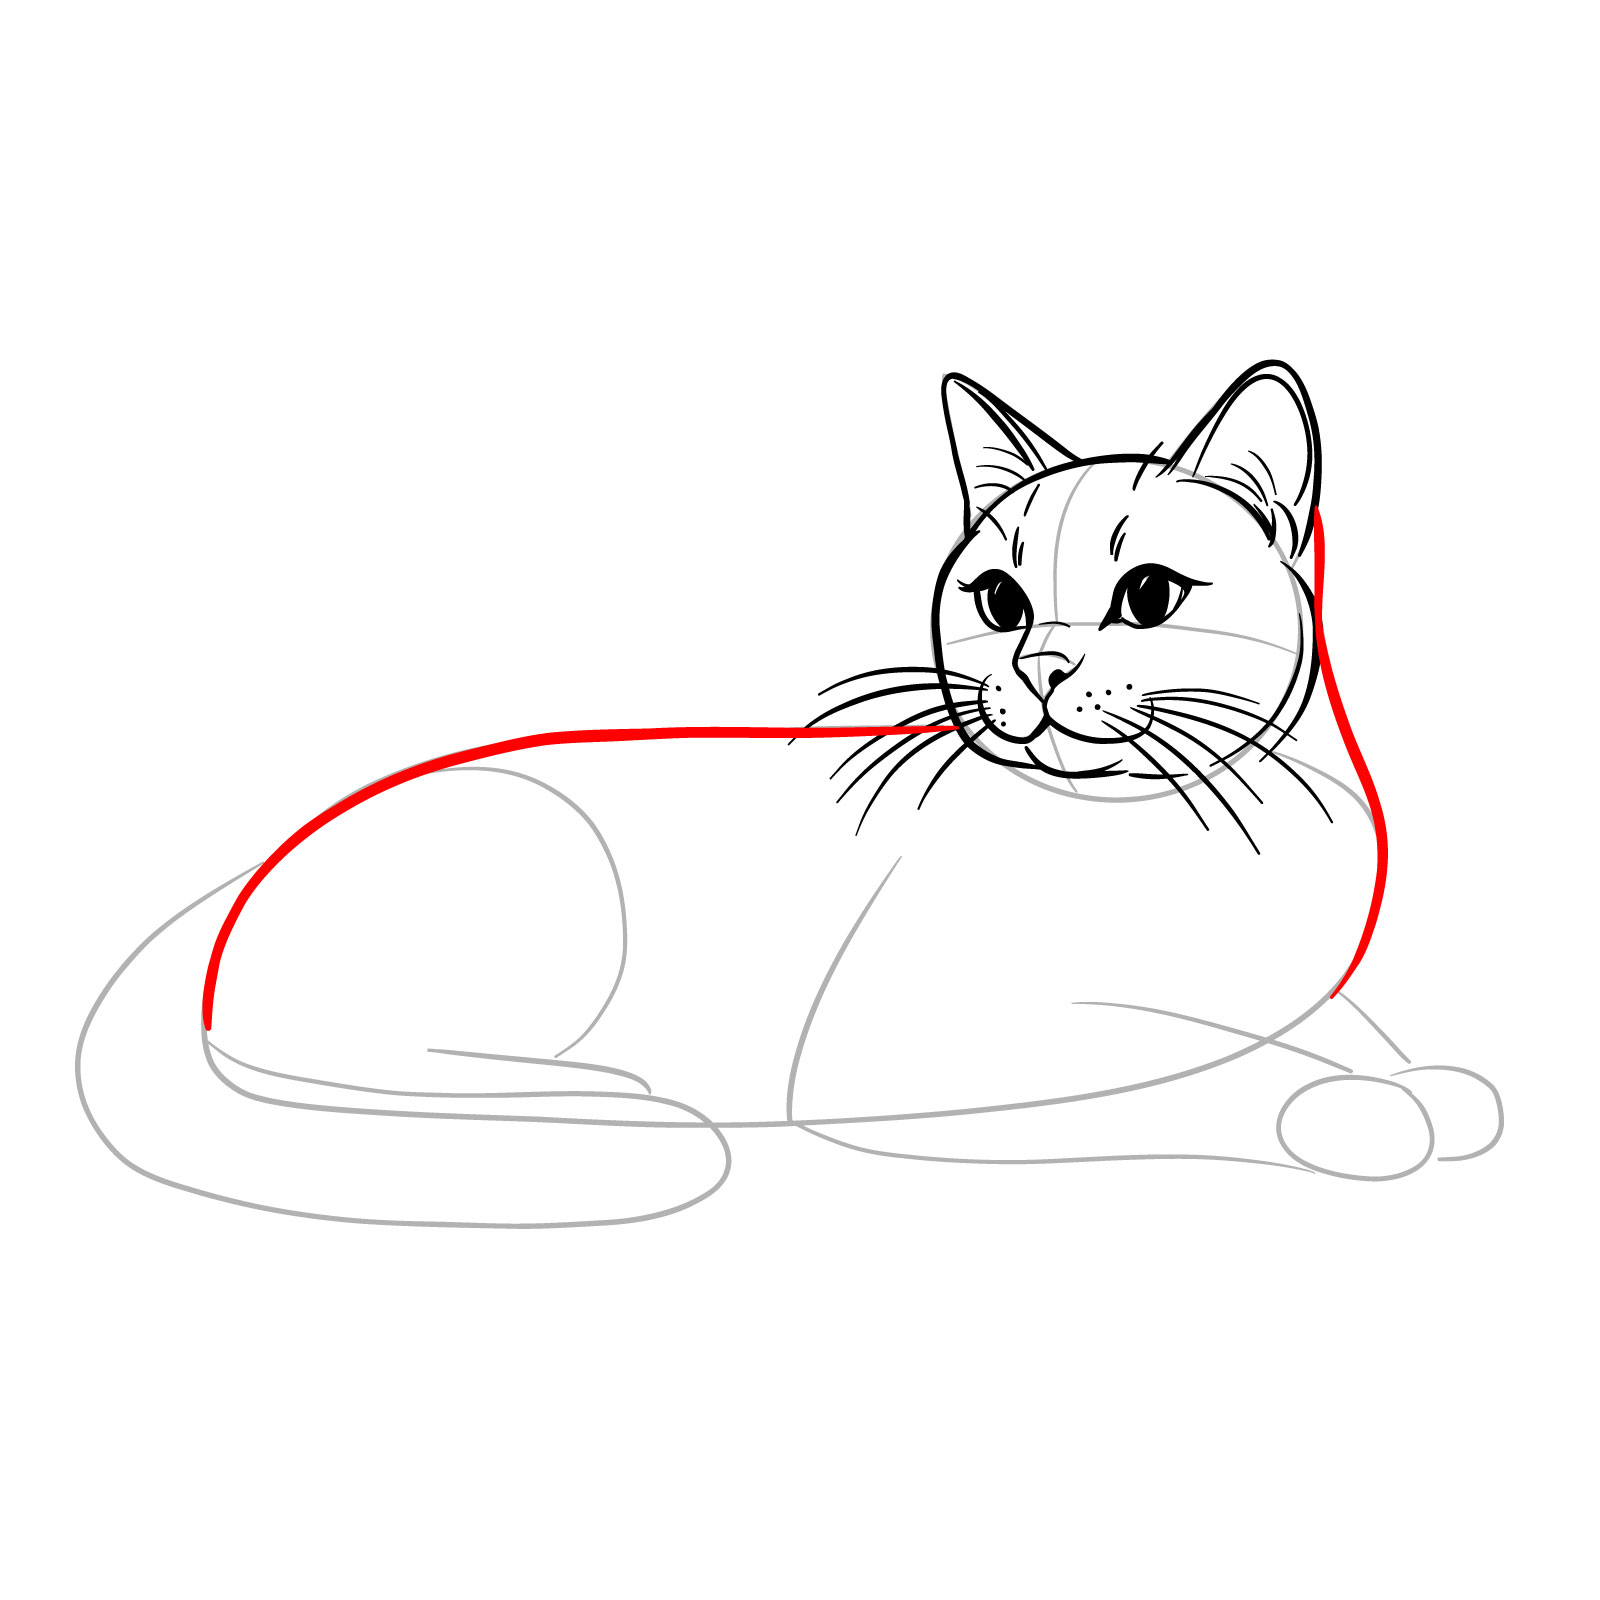 Illustration highlighting the refined outline of a cat's back and neck in a lying side view pose - step 10